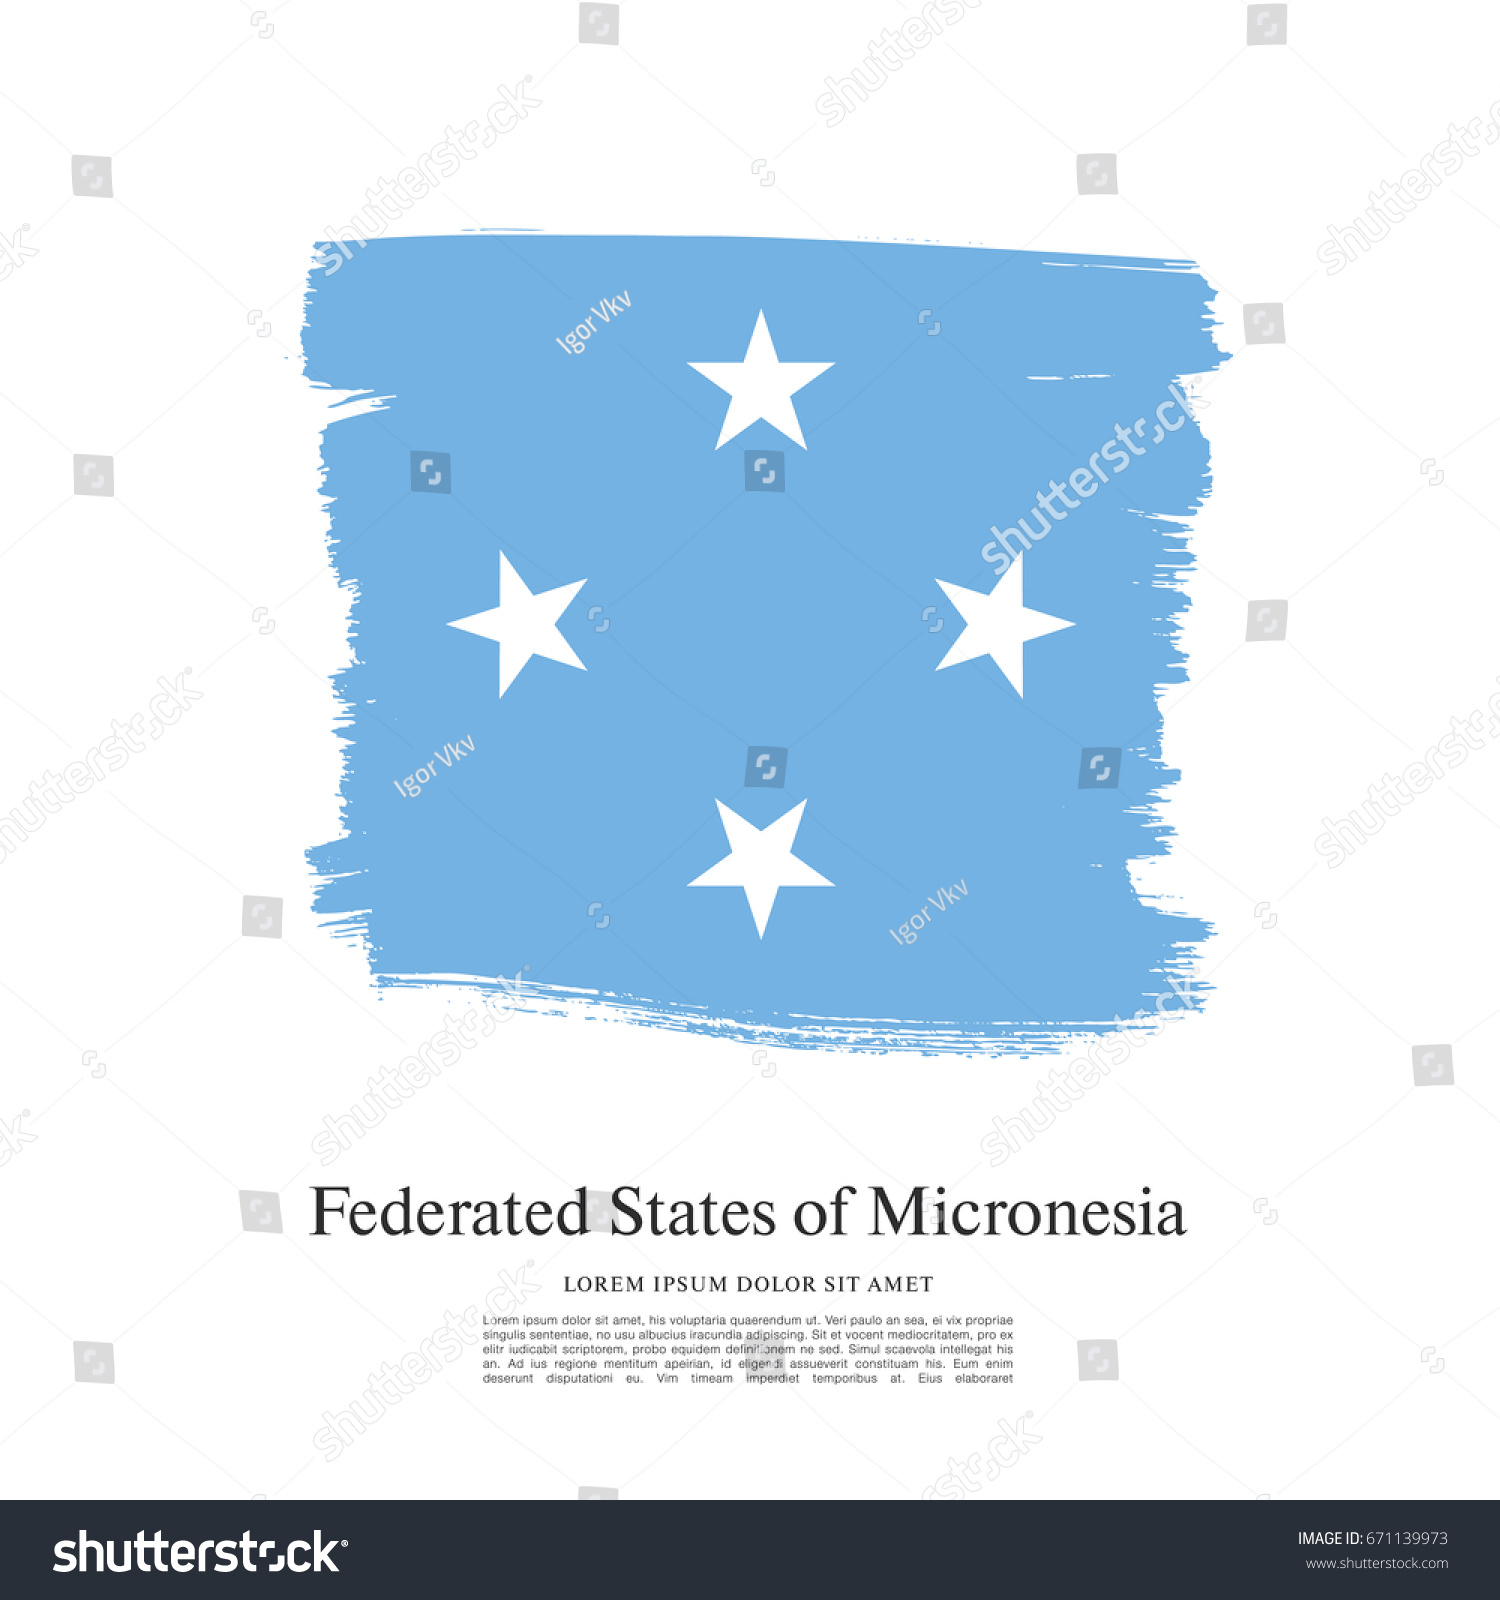 Flag Federated States Micronesia Stock Vector 671139973 - Shutterstock